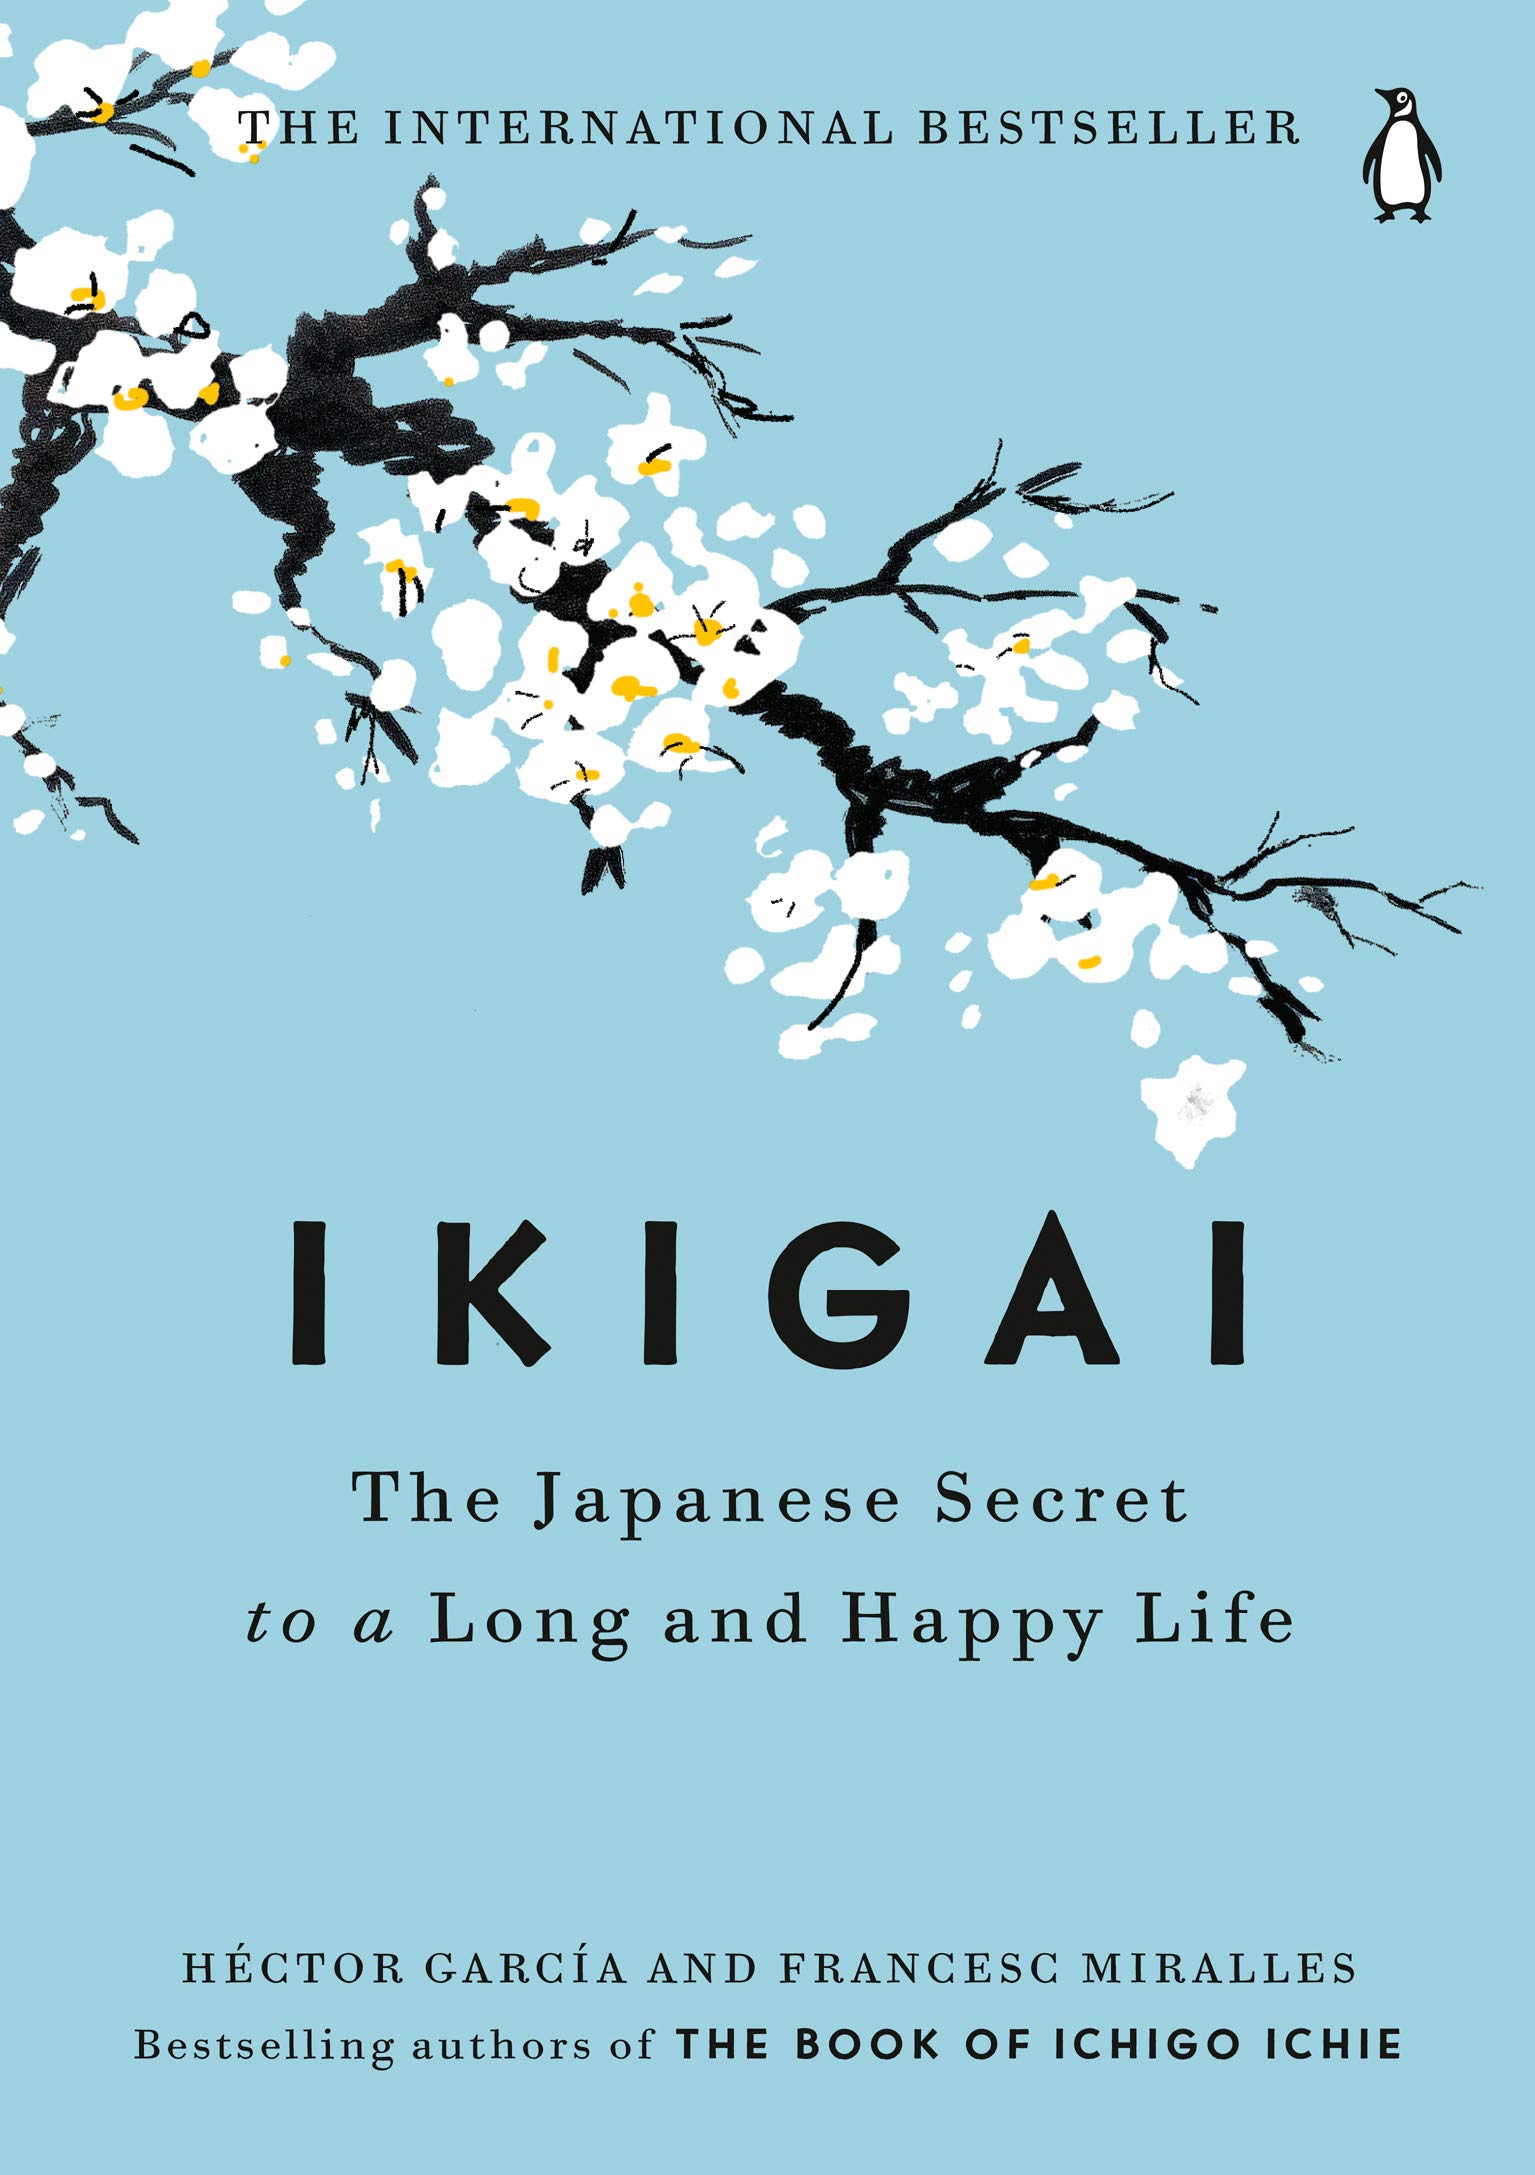 Ikigai: The Japanese secret to a long and happy life Book Summary